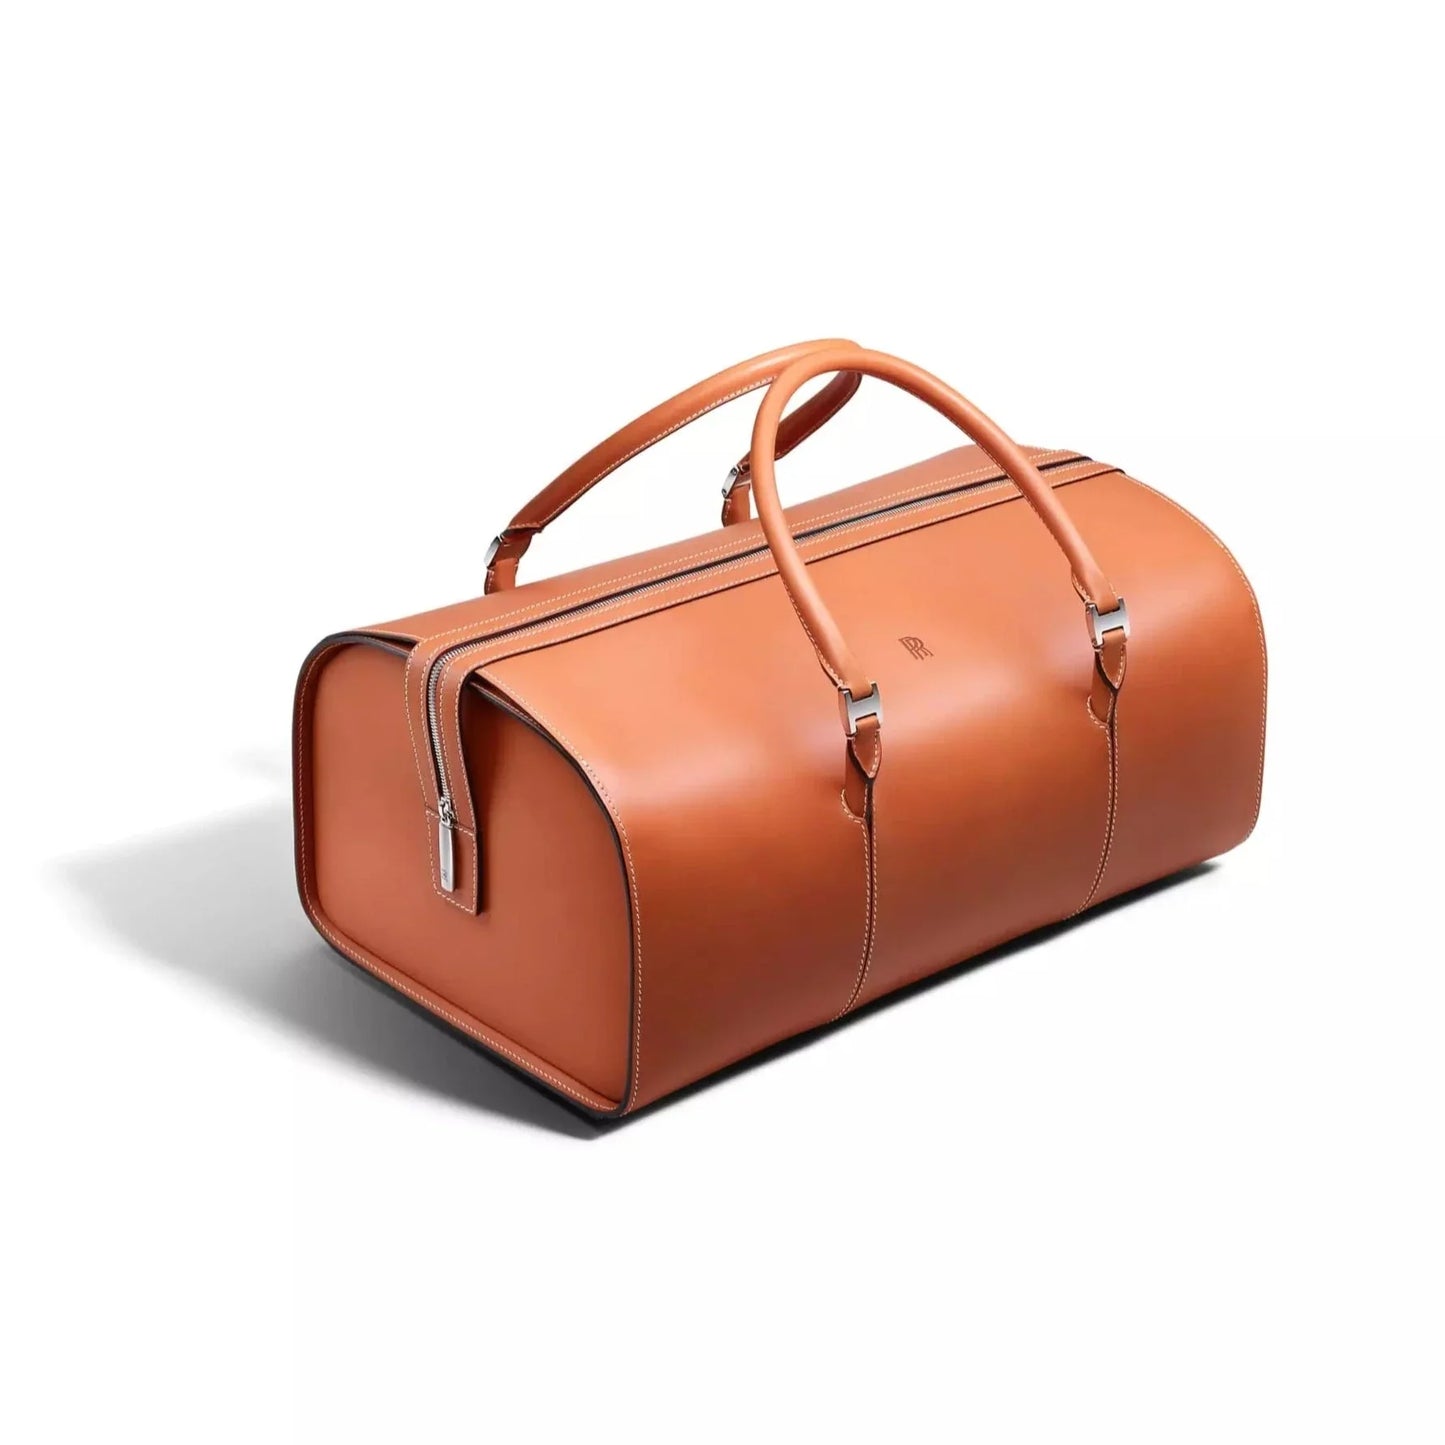 Rolls-Royce Iconic Luggage Collection